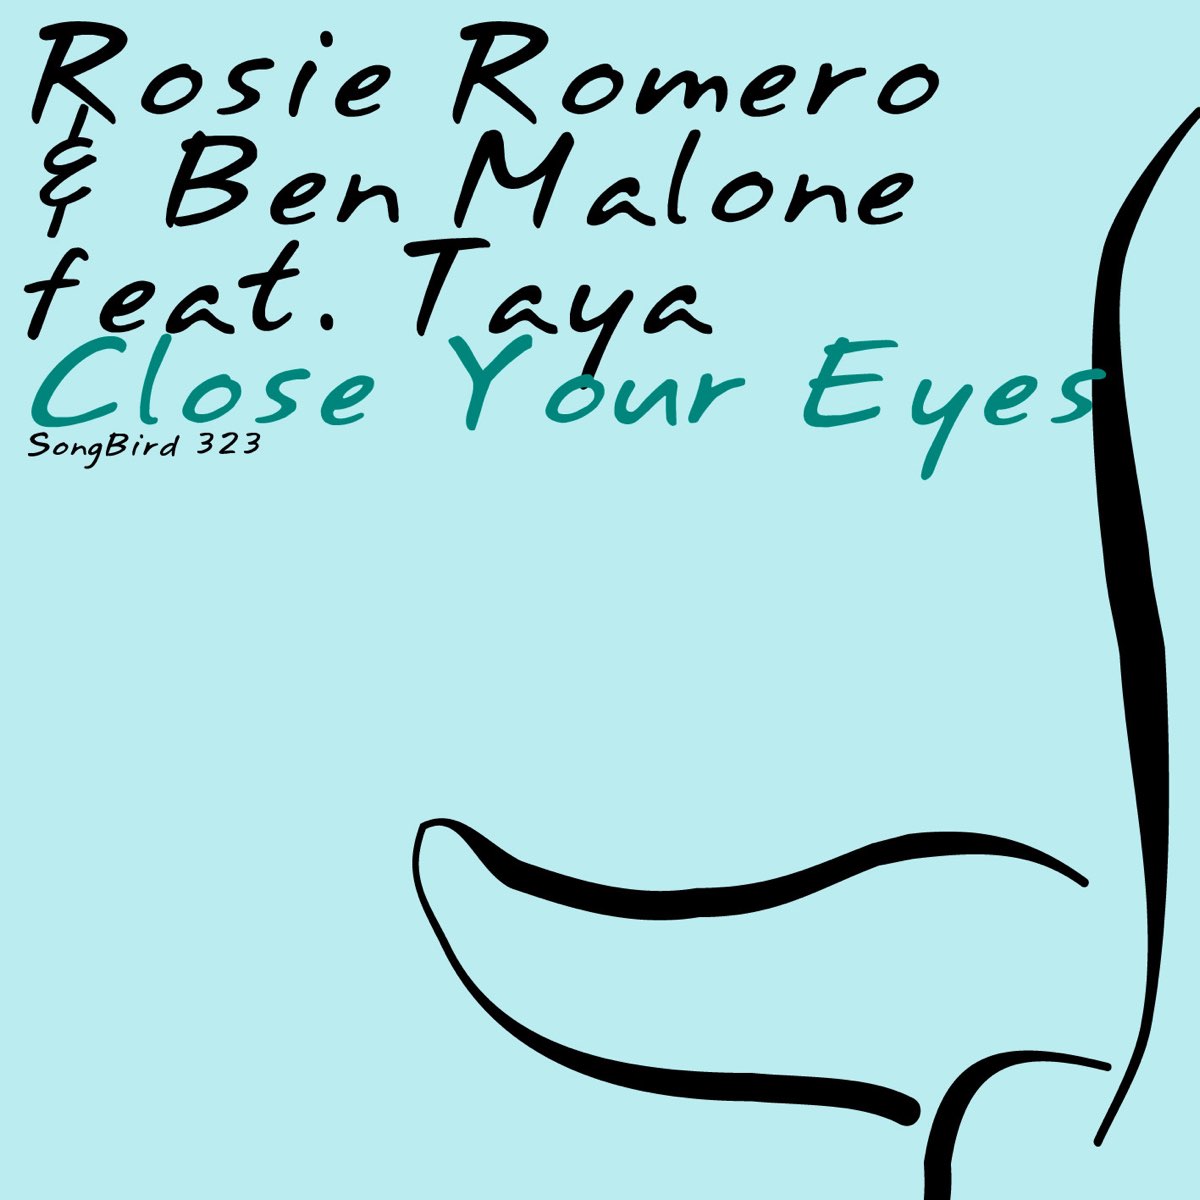 Close your eyes come to me. Ben Malone. Close your Eyes песня. John k feat. Rosie.